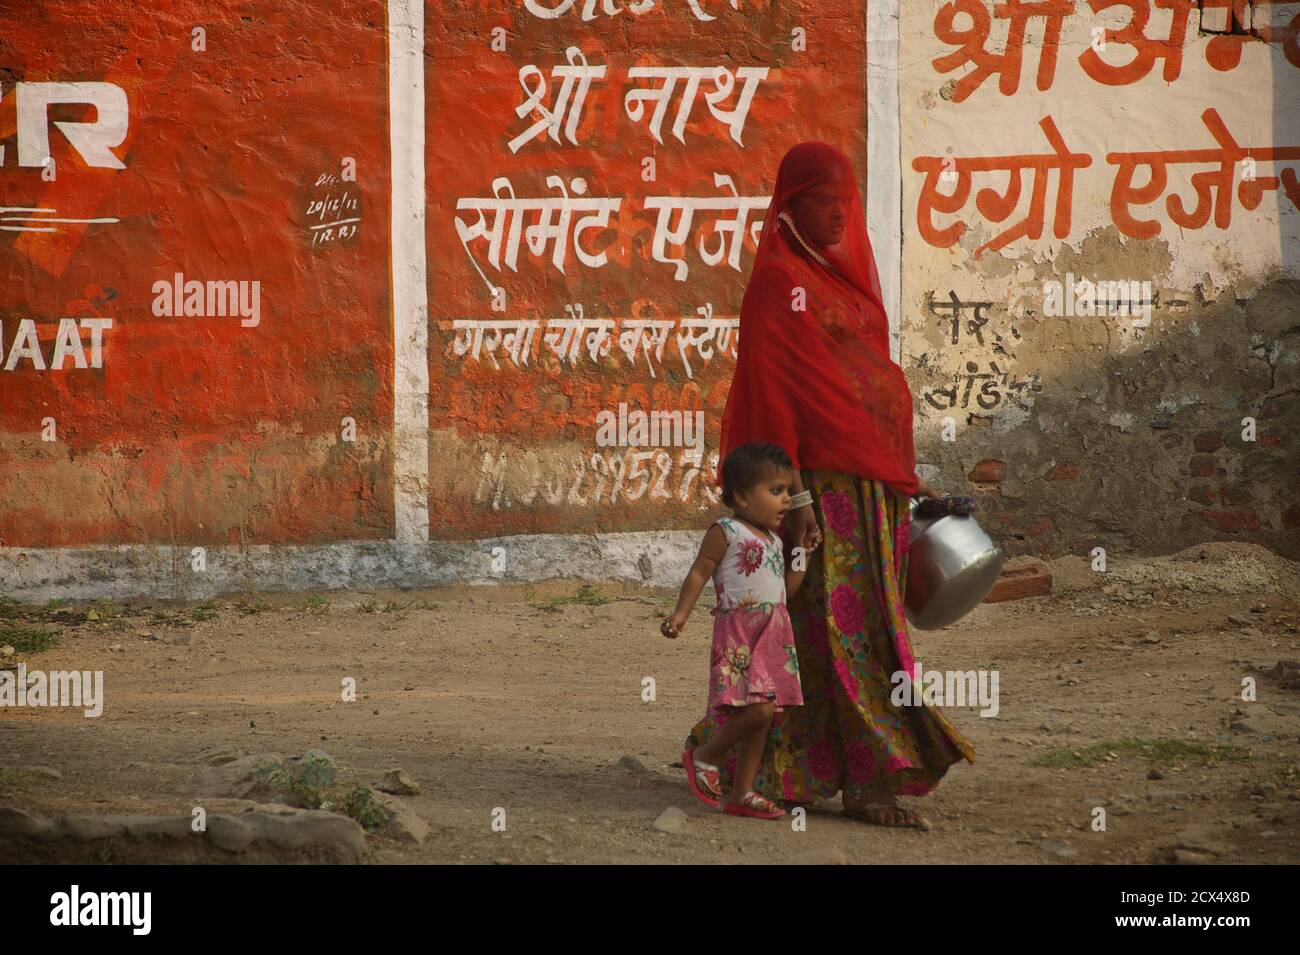 Indian woman in red veil with child. Rajasthan, India.  This image contains culturally relevant material: A sari is a South Asian female garment that consists of a drape varying from 4 to 8 metres in length and 60cm to 1.20m in breadth that is typically wrapped around the waist, with one end draped over the shoulder, baring the midriff. The sari is usually worn over a petticoat. The sari is associated with grace and is widely regarded as a symbol of Indian culture. Stock Photo